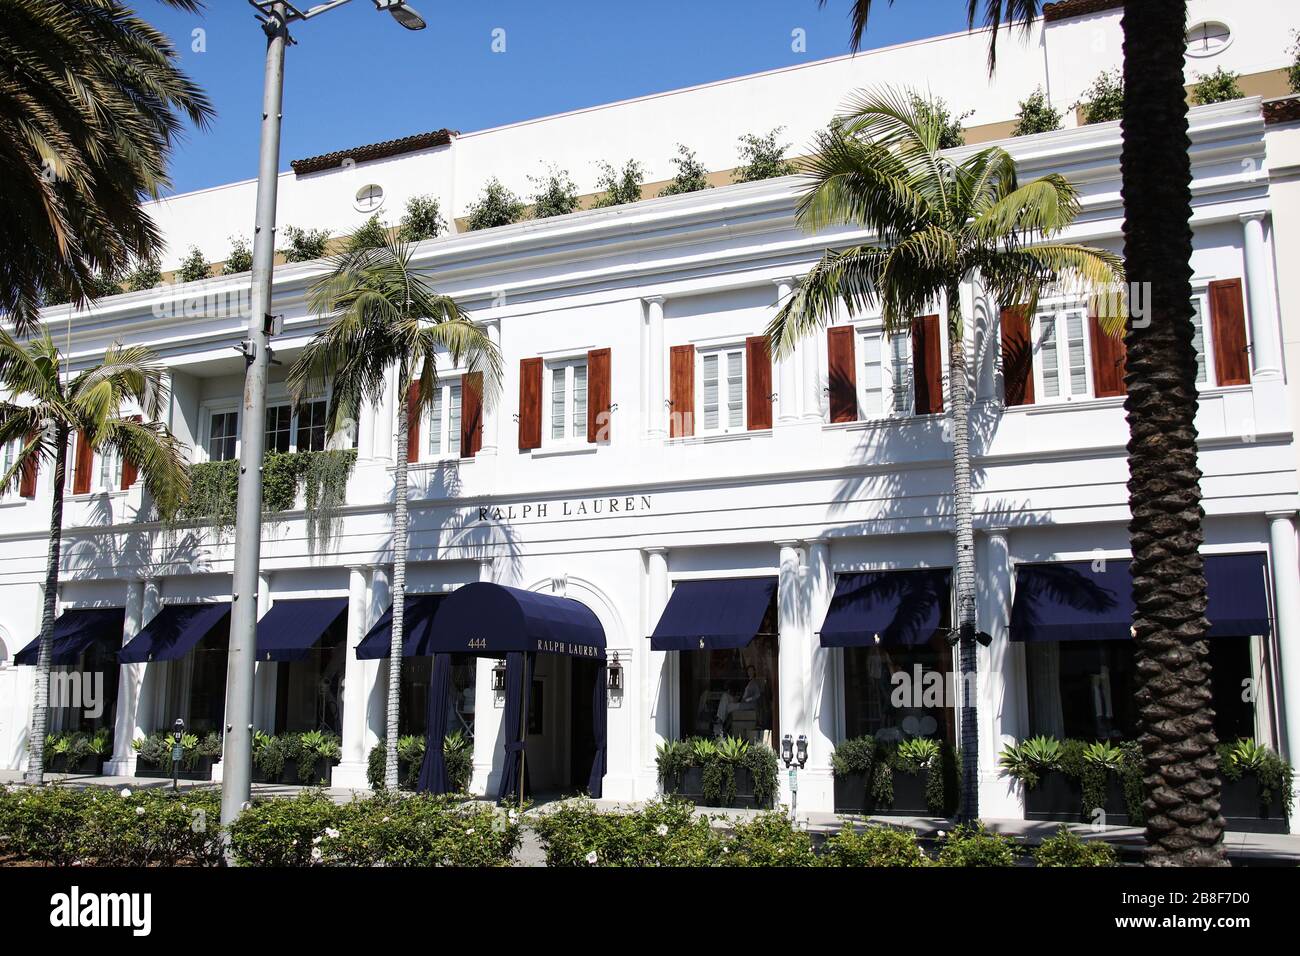 BEVERLY HILLS, LOS ANGELES, CALIFORNIA, USA - MARCH 21: Ralph Lauren  Beverly Hills Rodeo Drive store, temporarily closed due to the coronavirus,  two days after the 'Safer at Home' order issued by